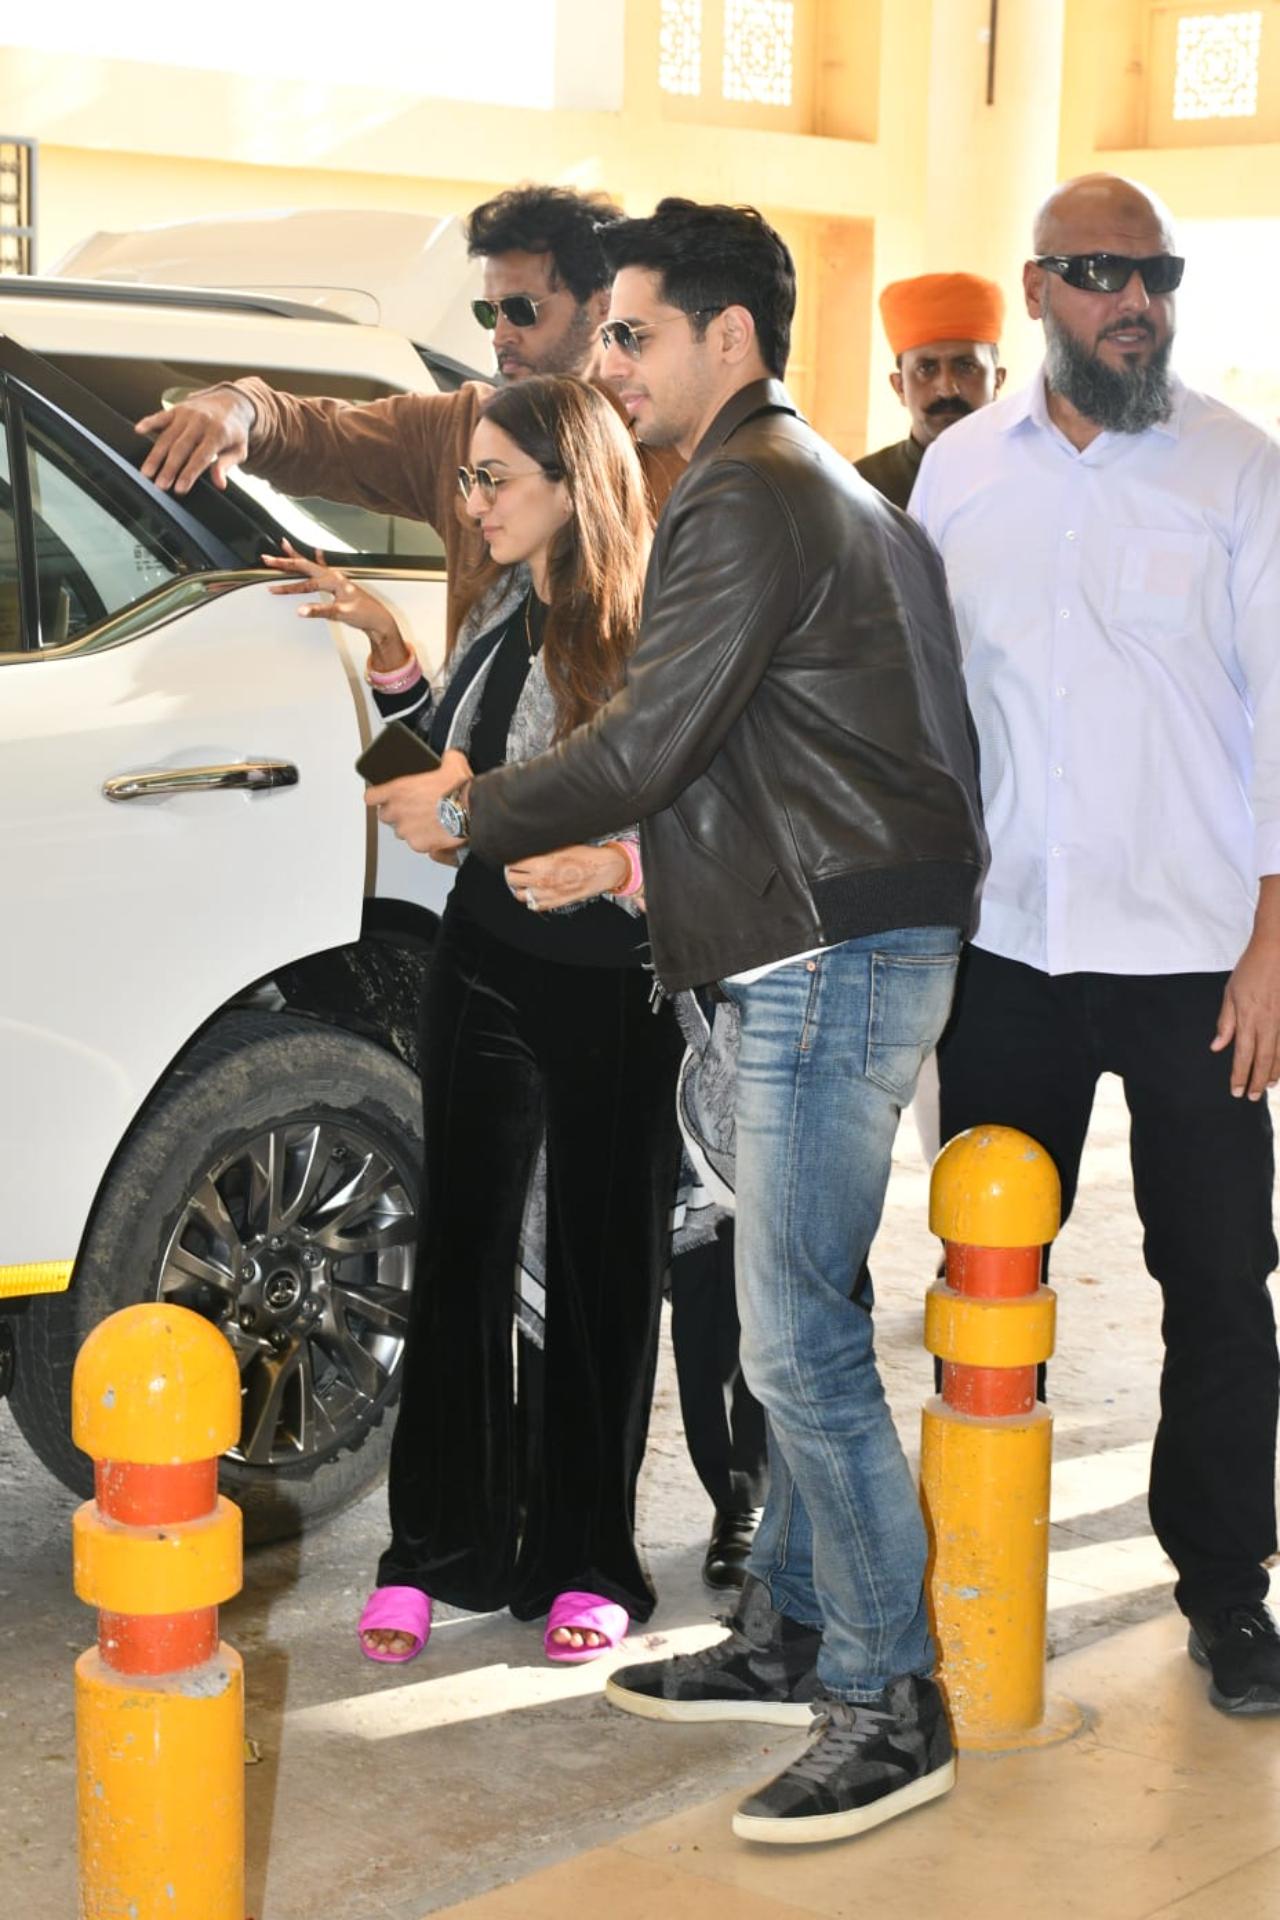 On Wednesday evening, the couple who have been the talk of the town for the past couple of weeks, were papped at the Jaisalmer airport. For the first time as husband and wife, Kiara and Sidharth were spotted together at the airport